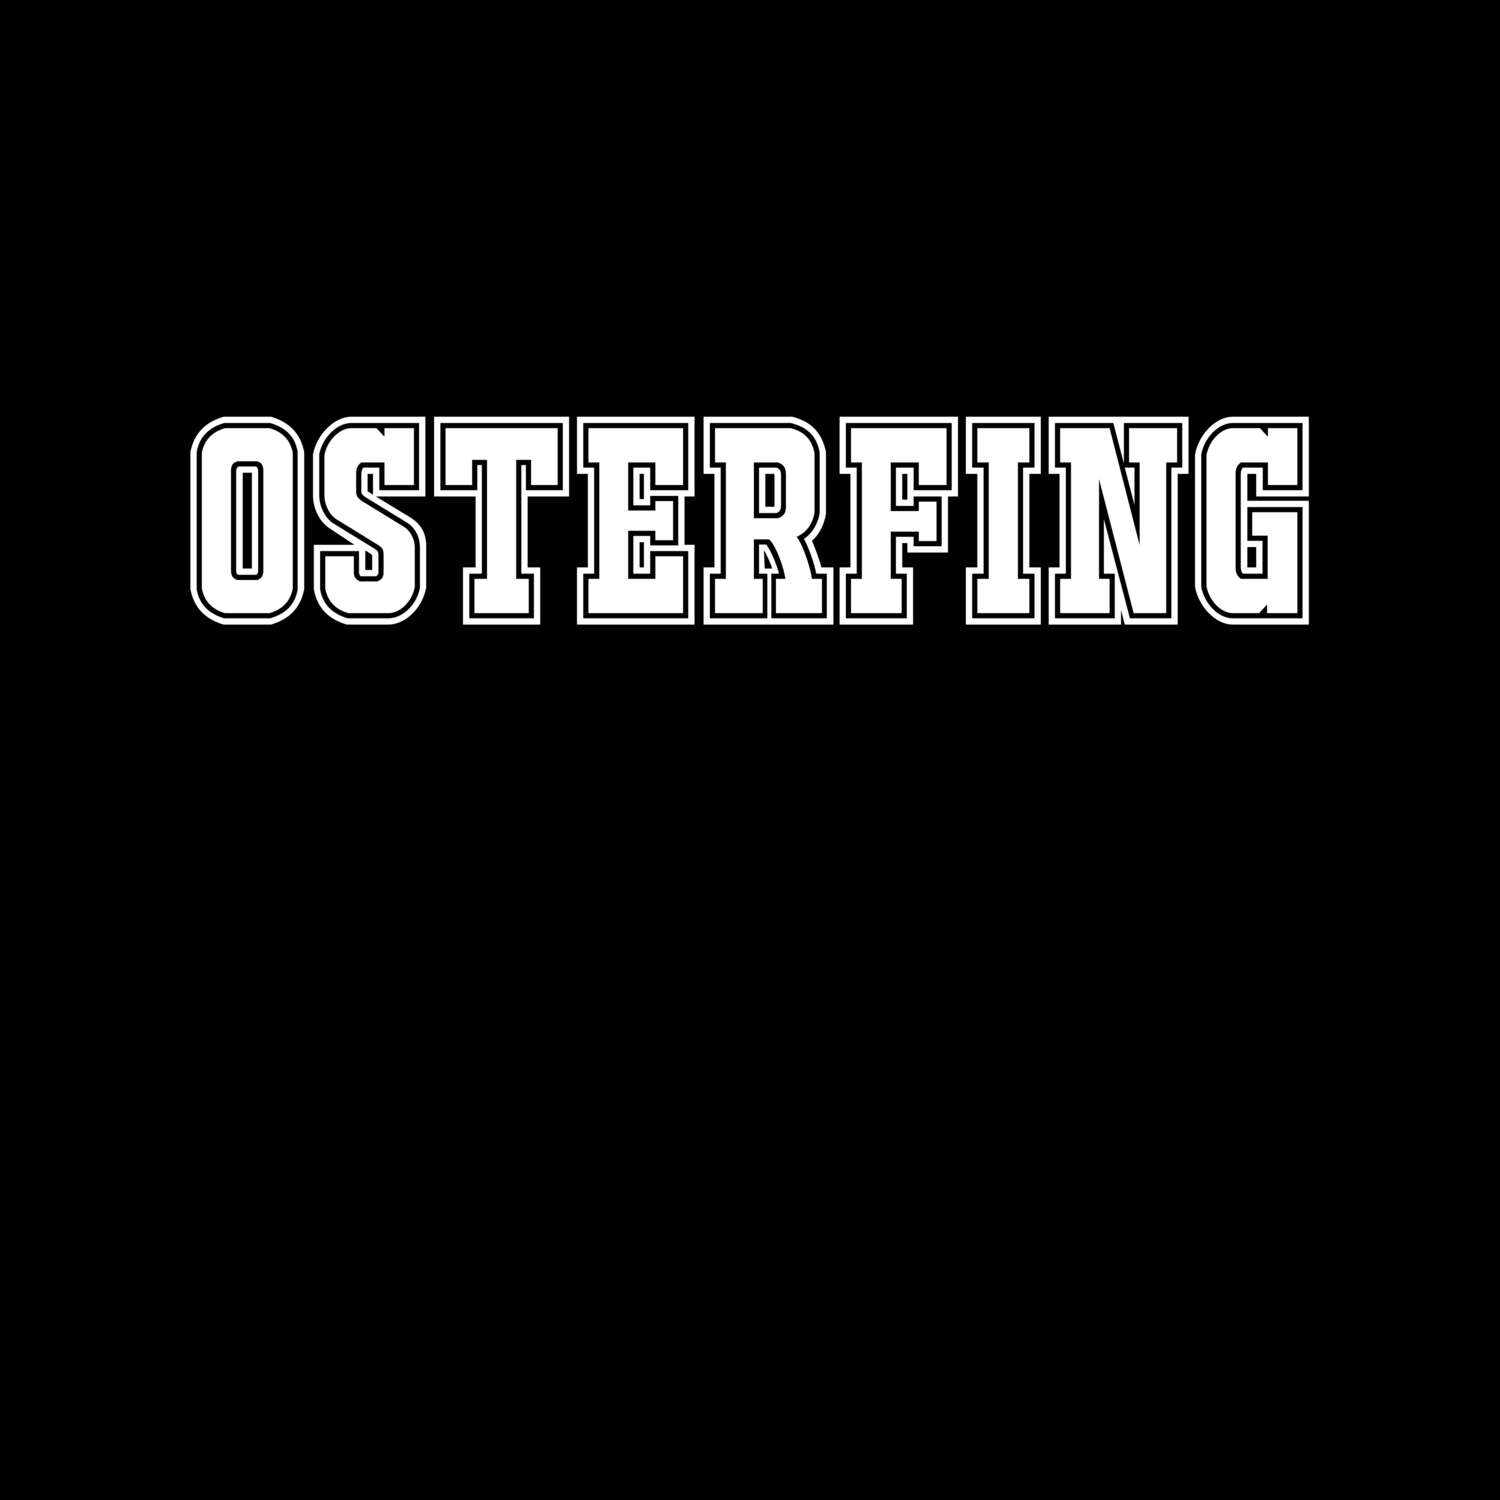 Osterfing T-Shirt »Classic«